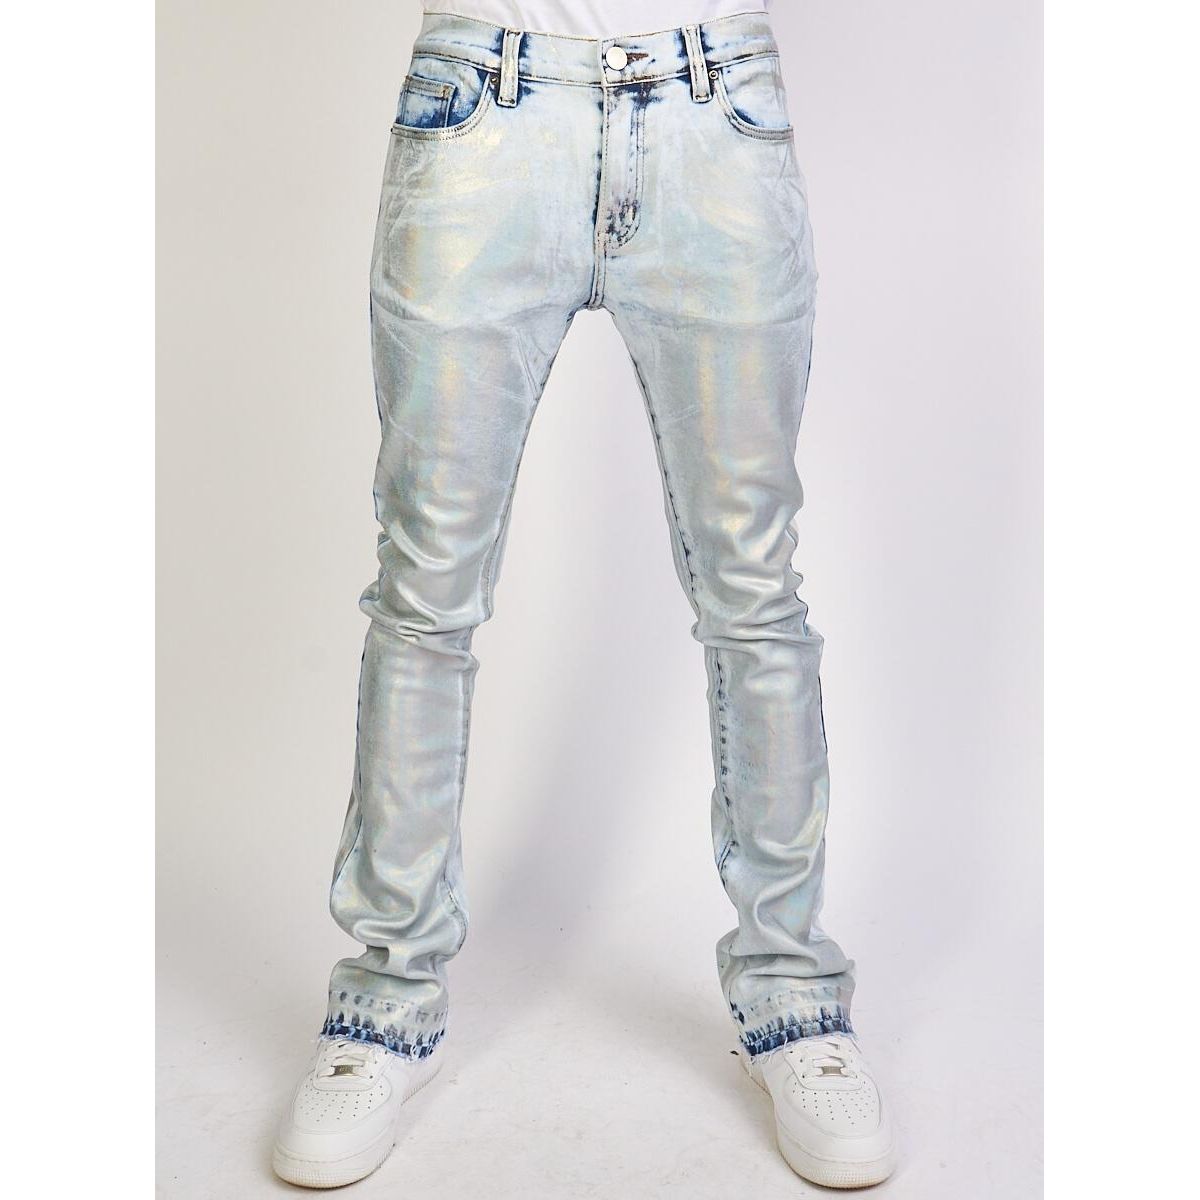 Politics Jeans - Barlow - Stacked - Silver Metal - 511